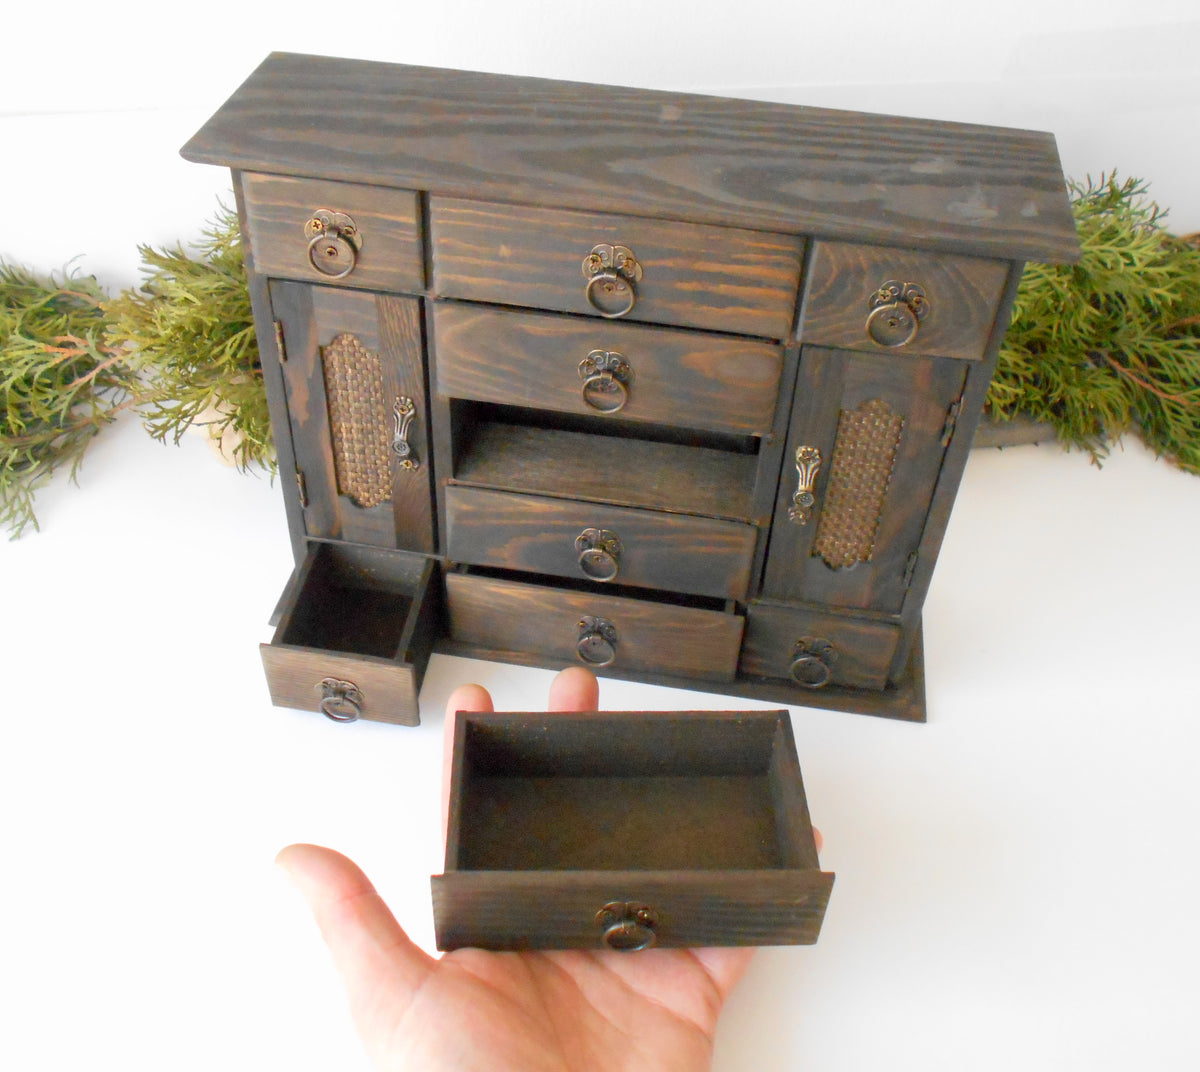 This wooden box with 9 drawers and 2 wardrobe doors is made of pinewood on the outside and bamboo wood for the inside of the drawers. It has metal pulls with a vintage bronze color. The surface of the box is smooth and refined with sanding paper.